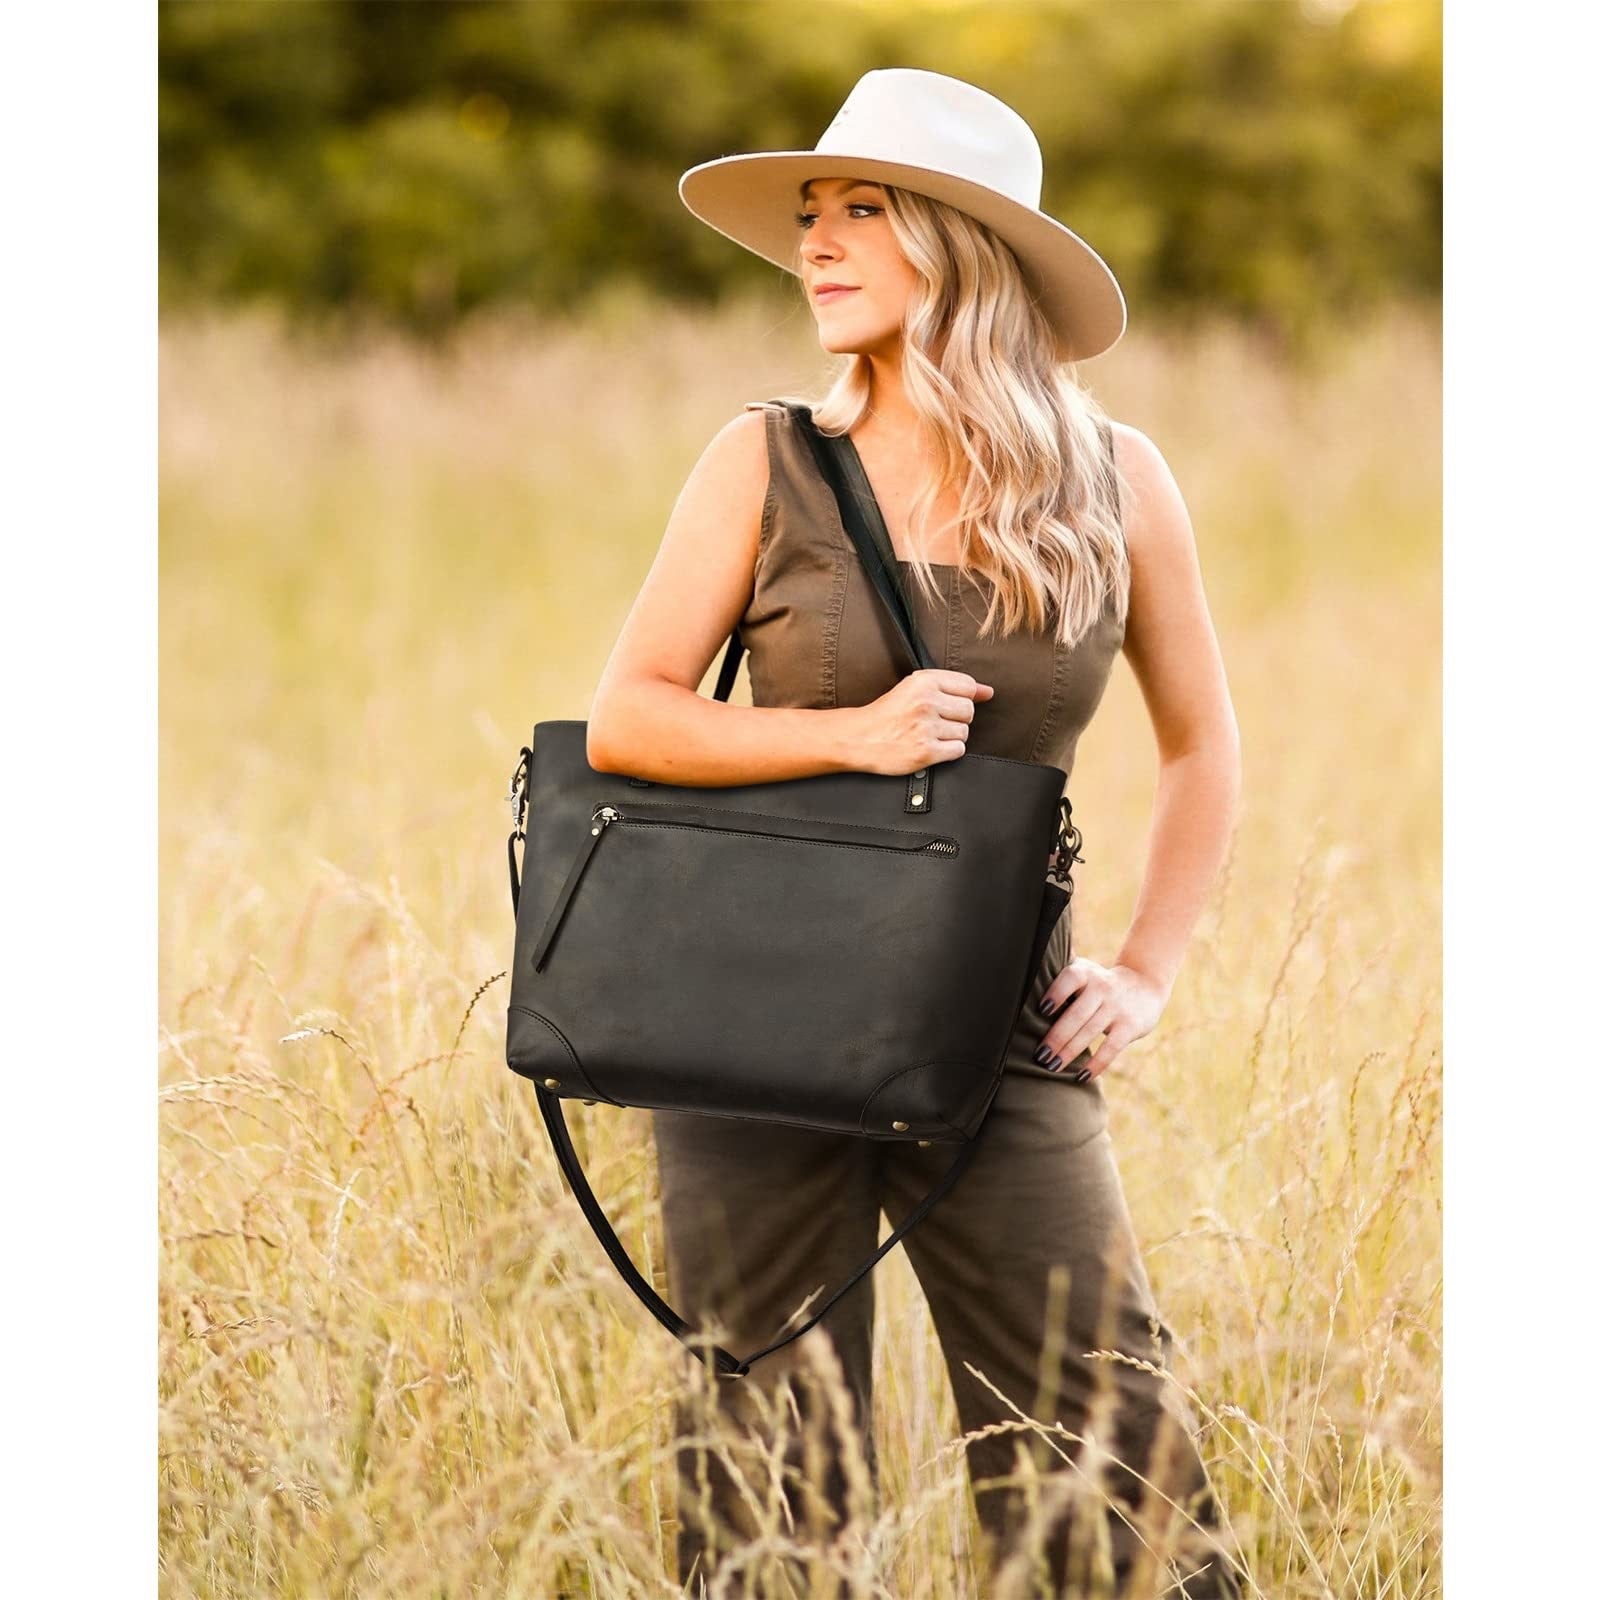 Leather Work Tote Bag for Women